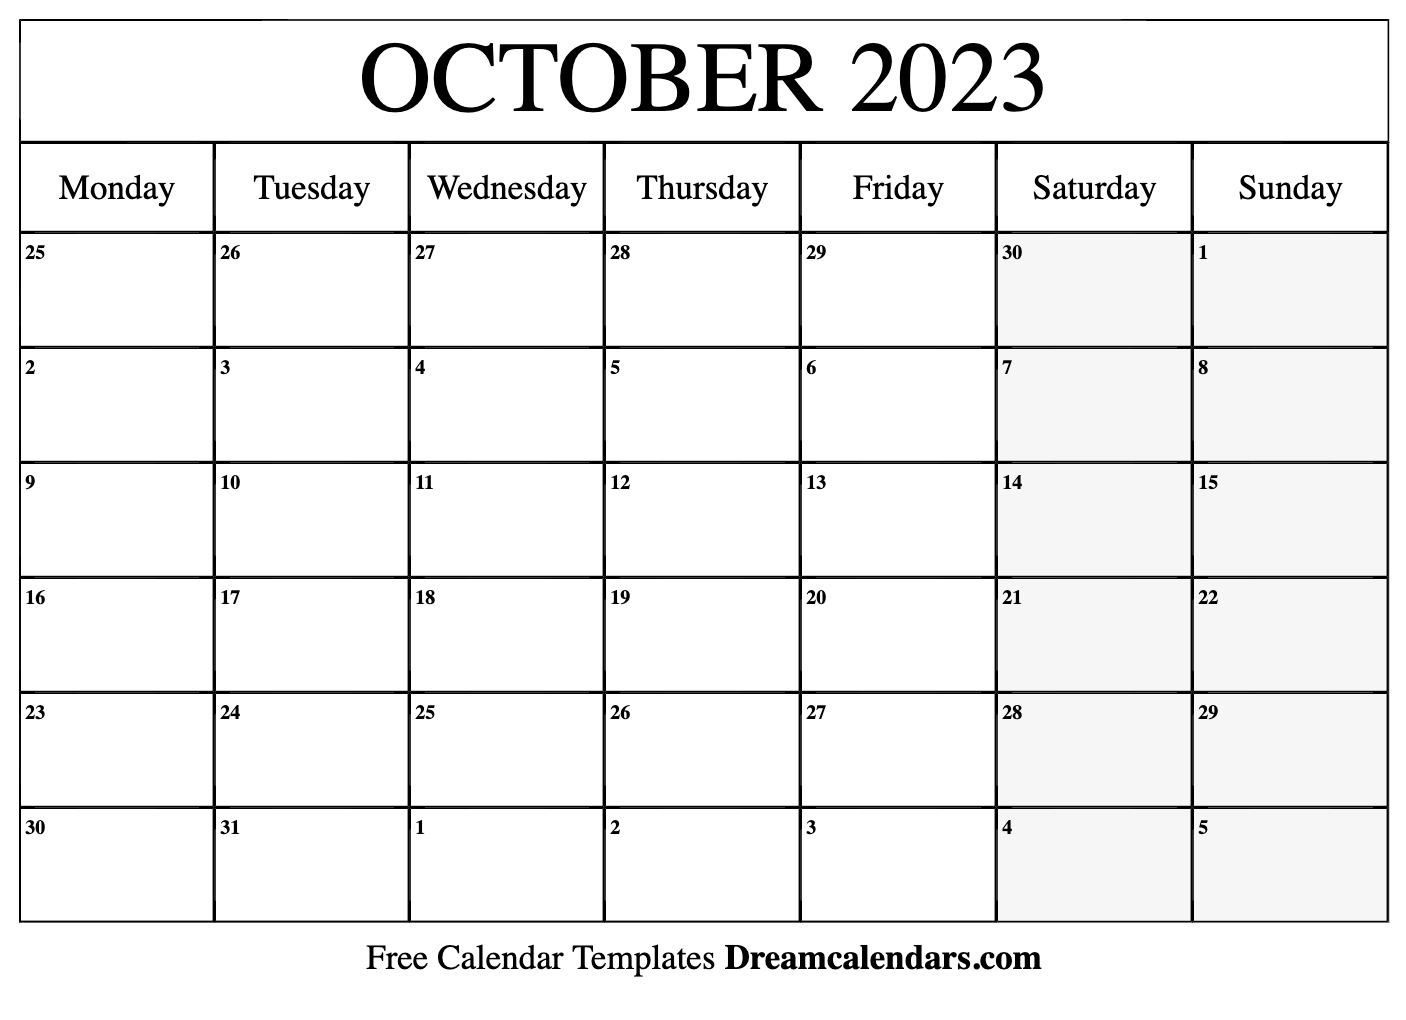 october-2023-calendar-free-blank-printable-with-holidays